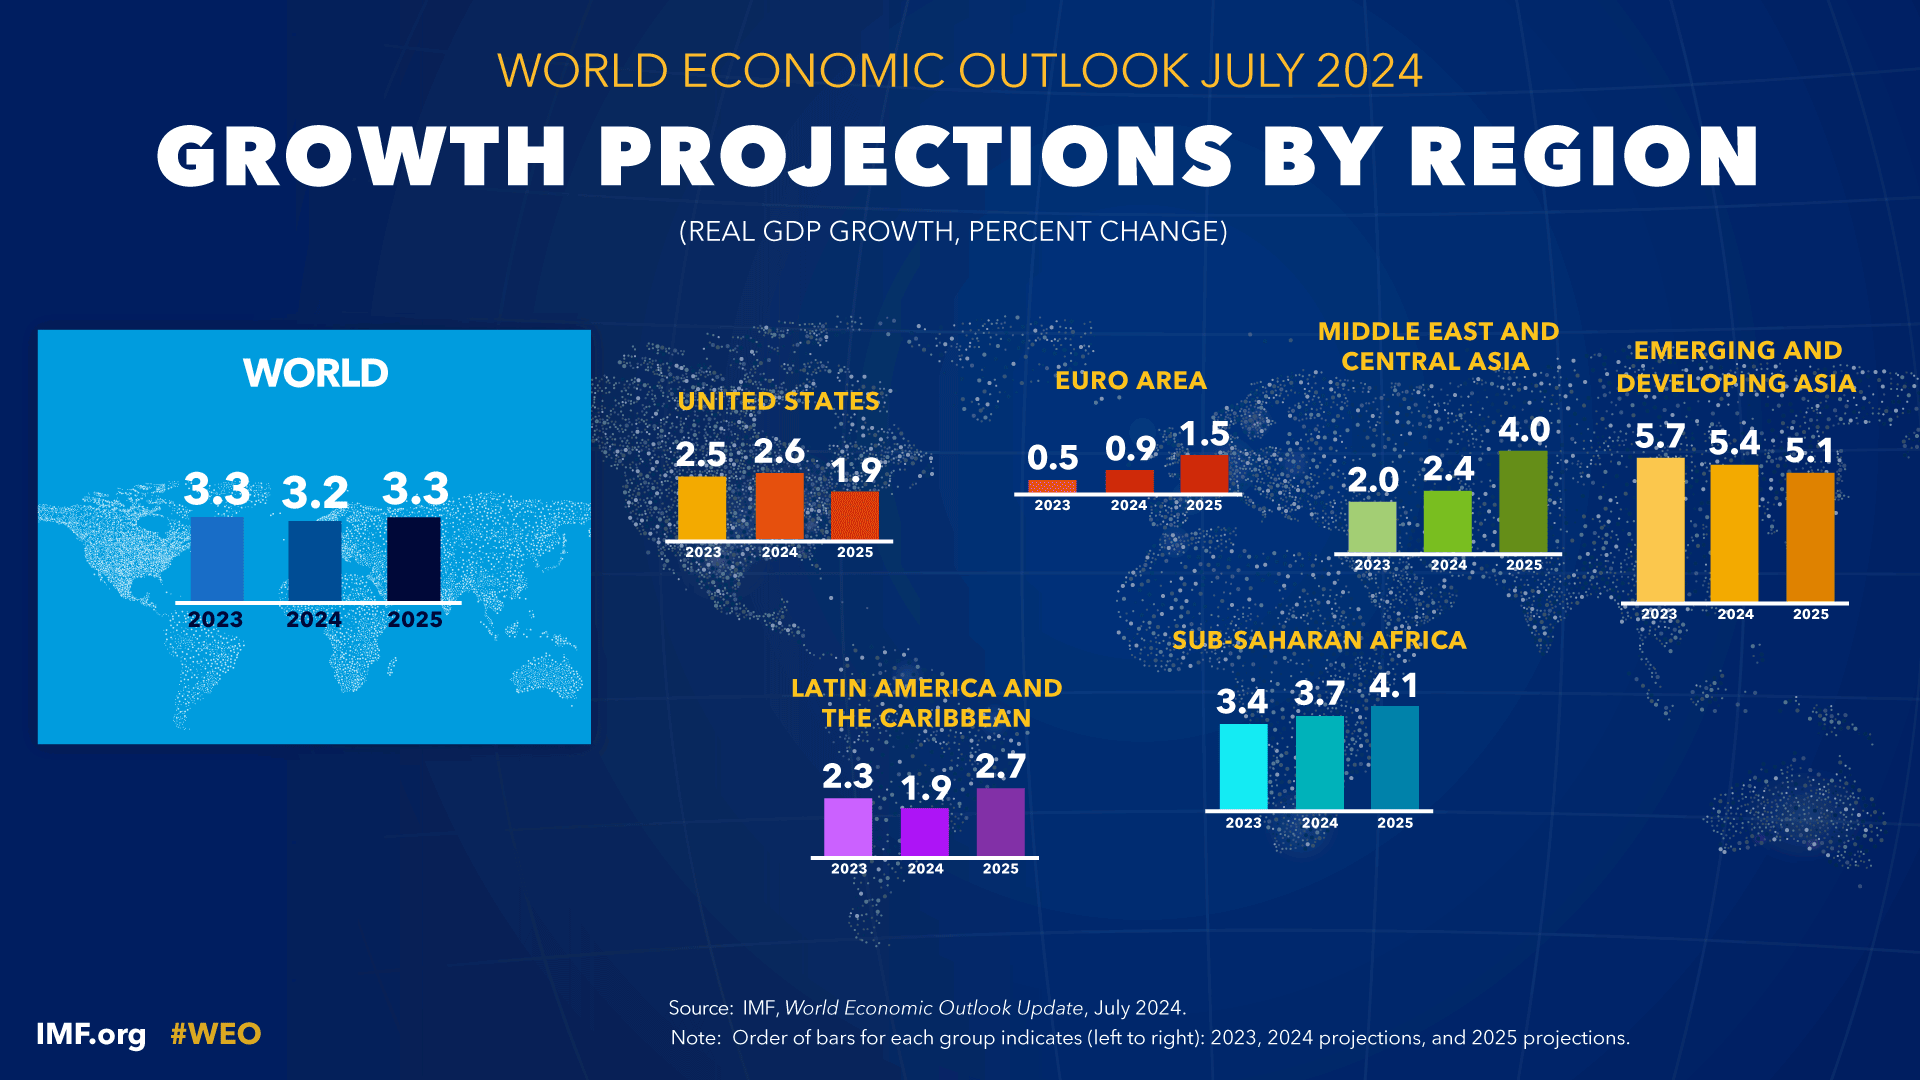 World Economic Outlook Update, July 2024: Growth Projections by Region